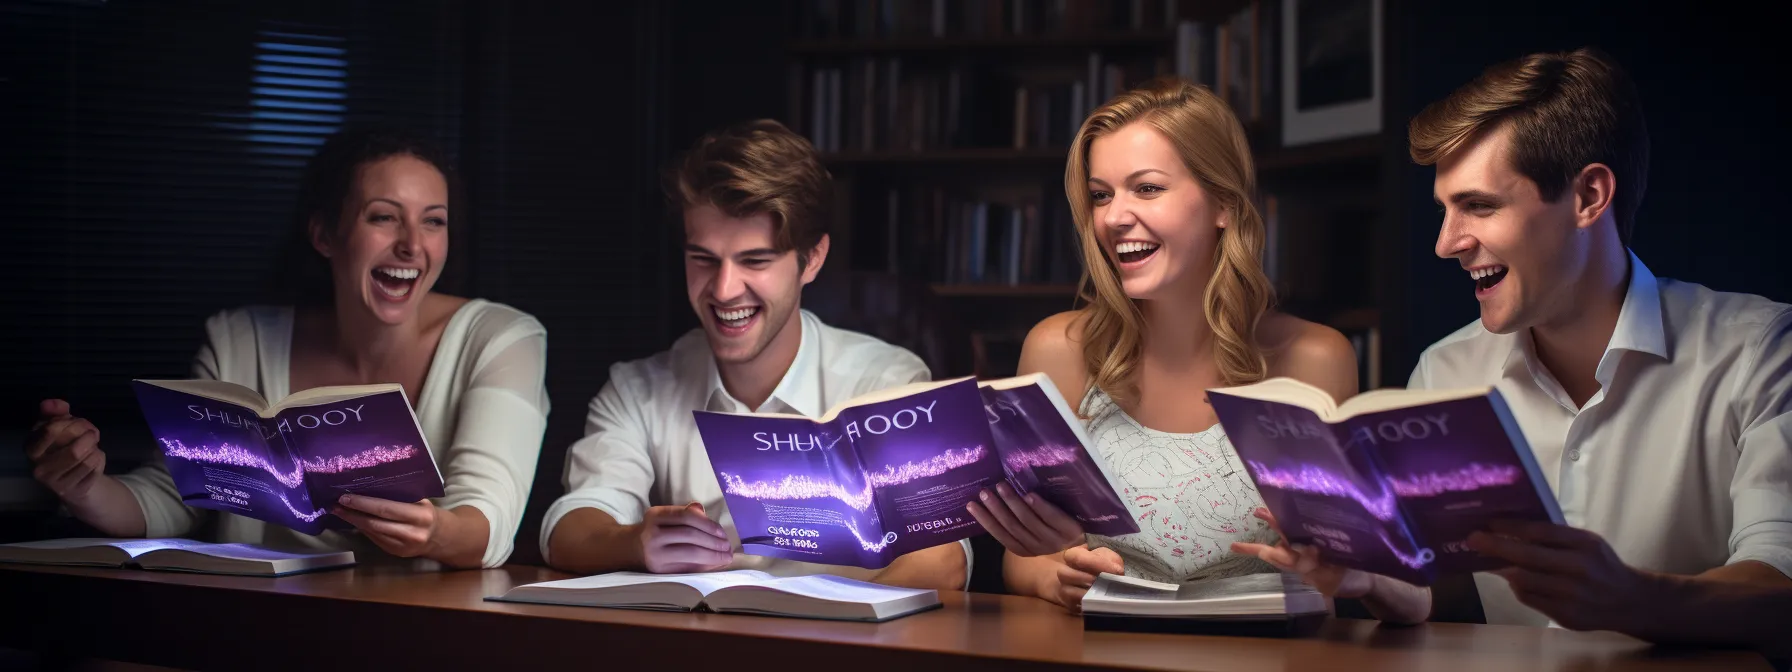 several individuals reading seotheory books with expressions of excitement and accomplishment on their faces, surrounded by charts and graphs displaying the improvement of their online presence.